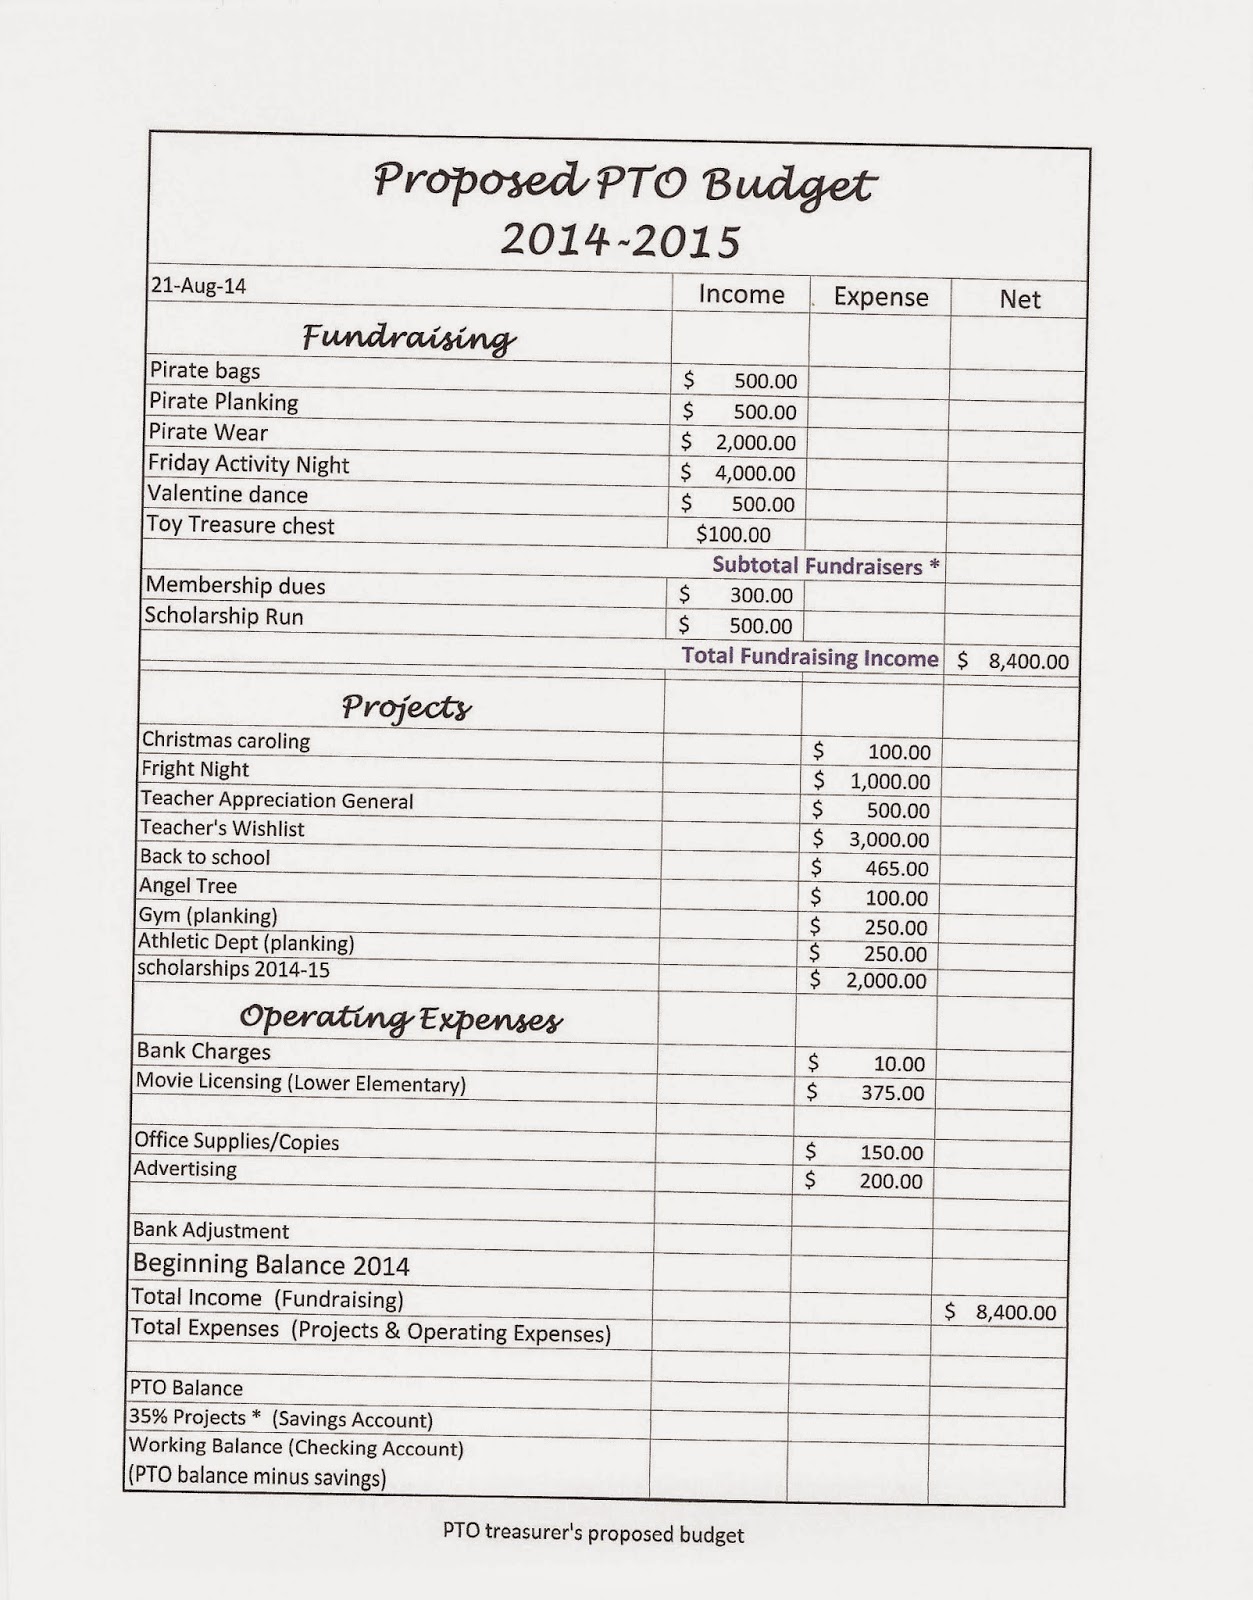 mannford-pto-2014-2015-proposed-budget